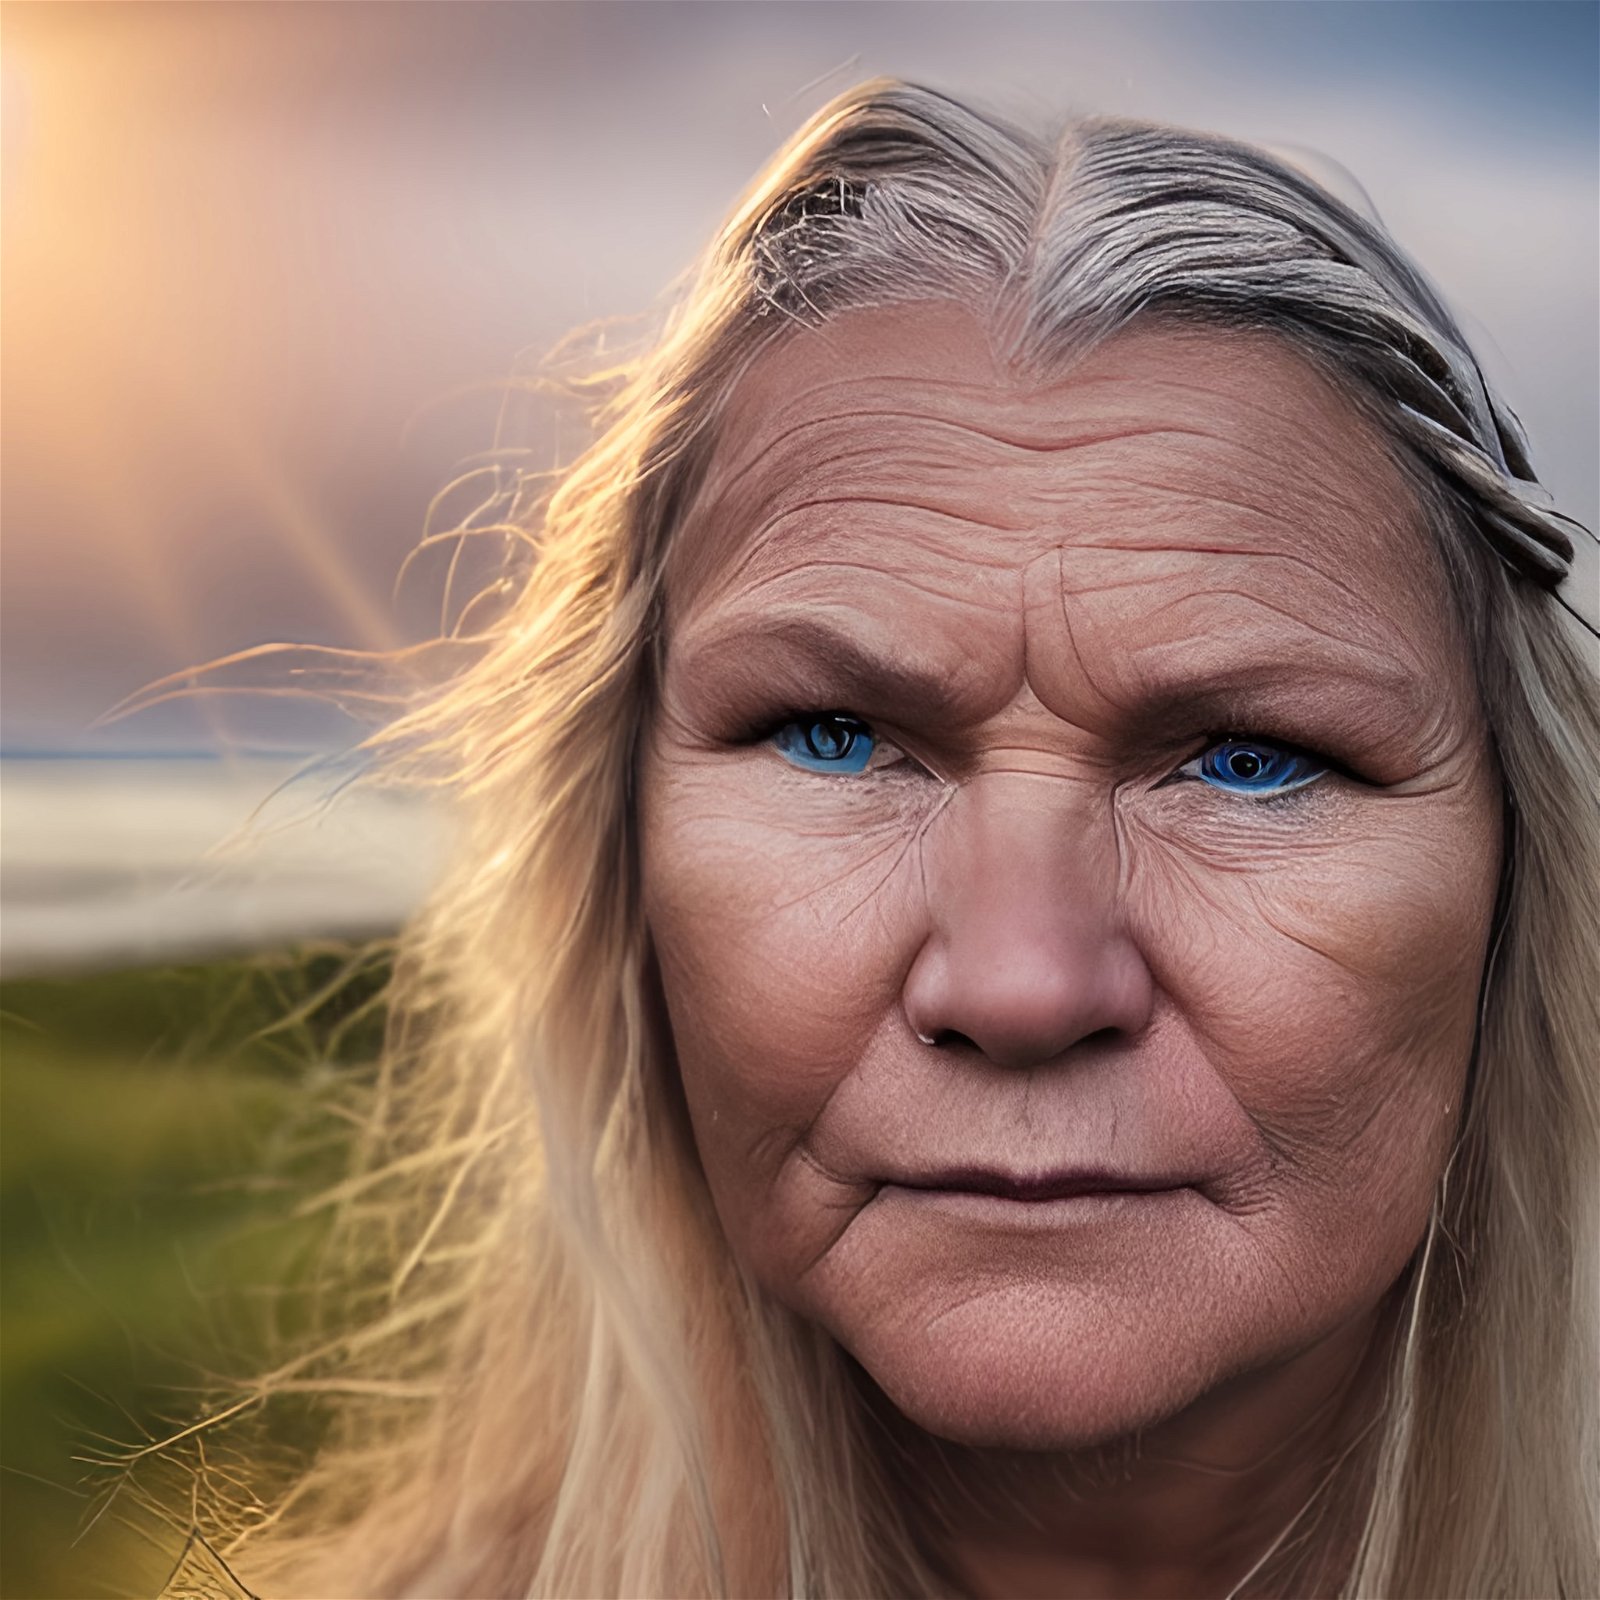 A fantasy viking woman looks intensely at the viewer, sunset in background